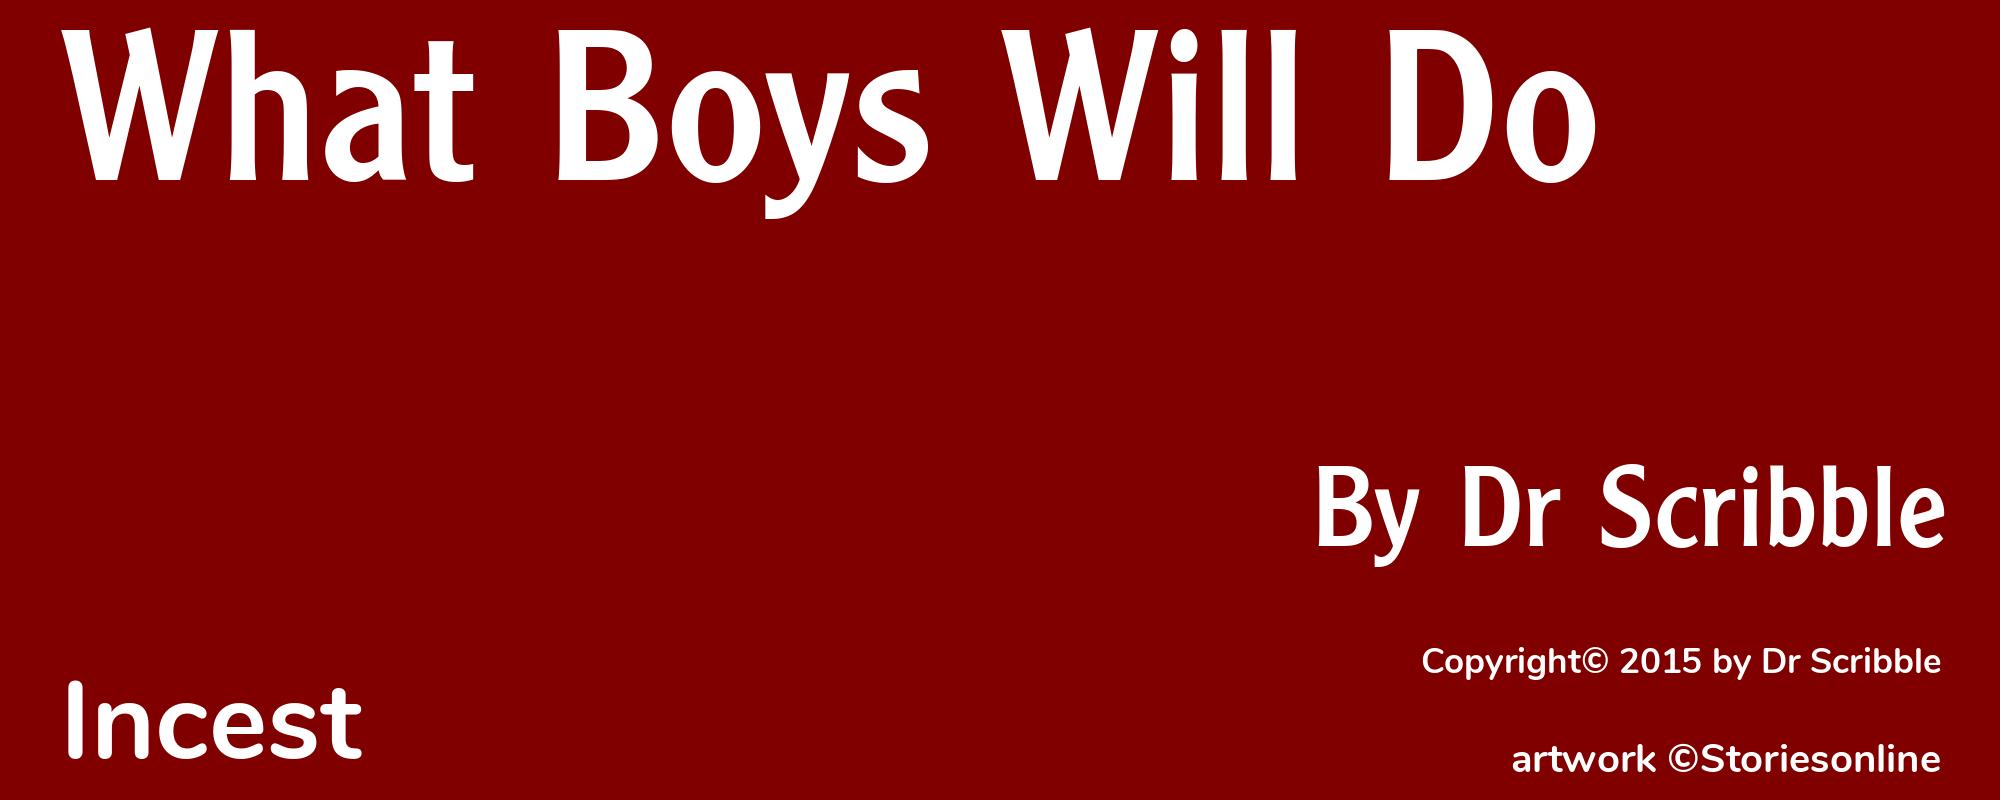 What Boys Will Do - Cover